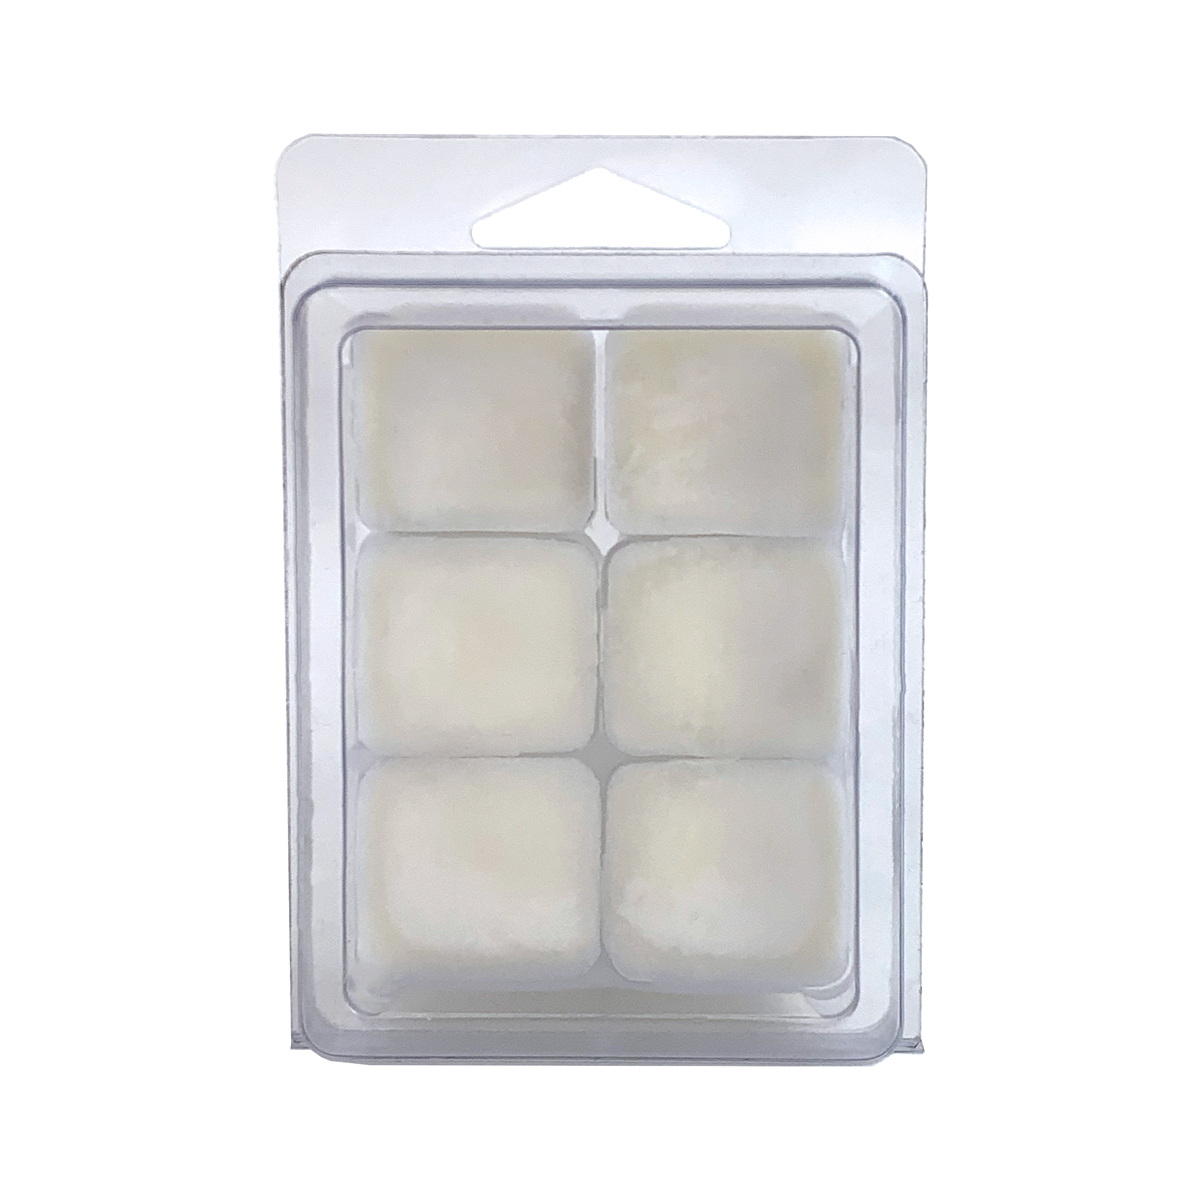 CAVITY CLAMSHELL MOLD FOR TART CANDLES (Pack of 6)